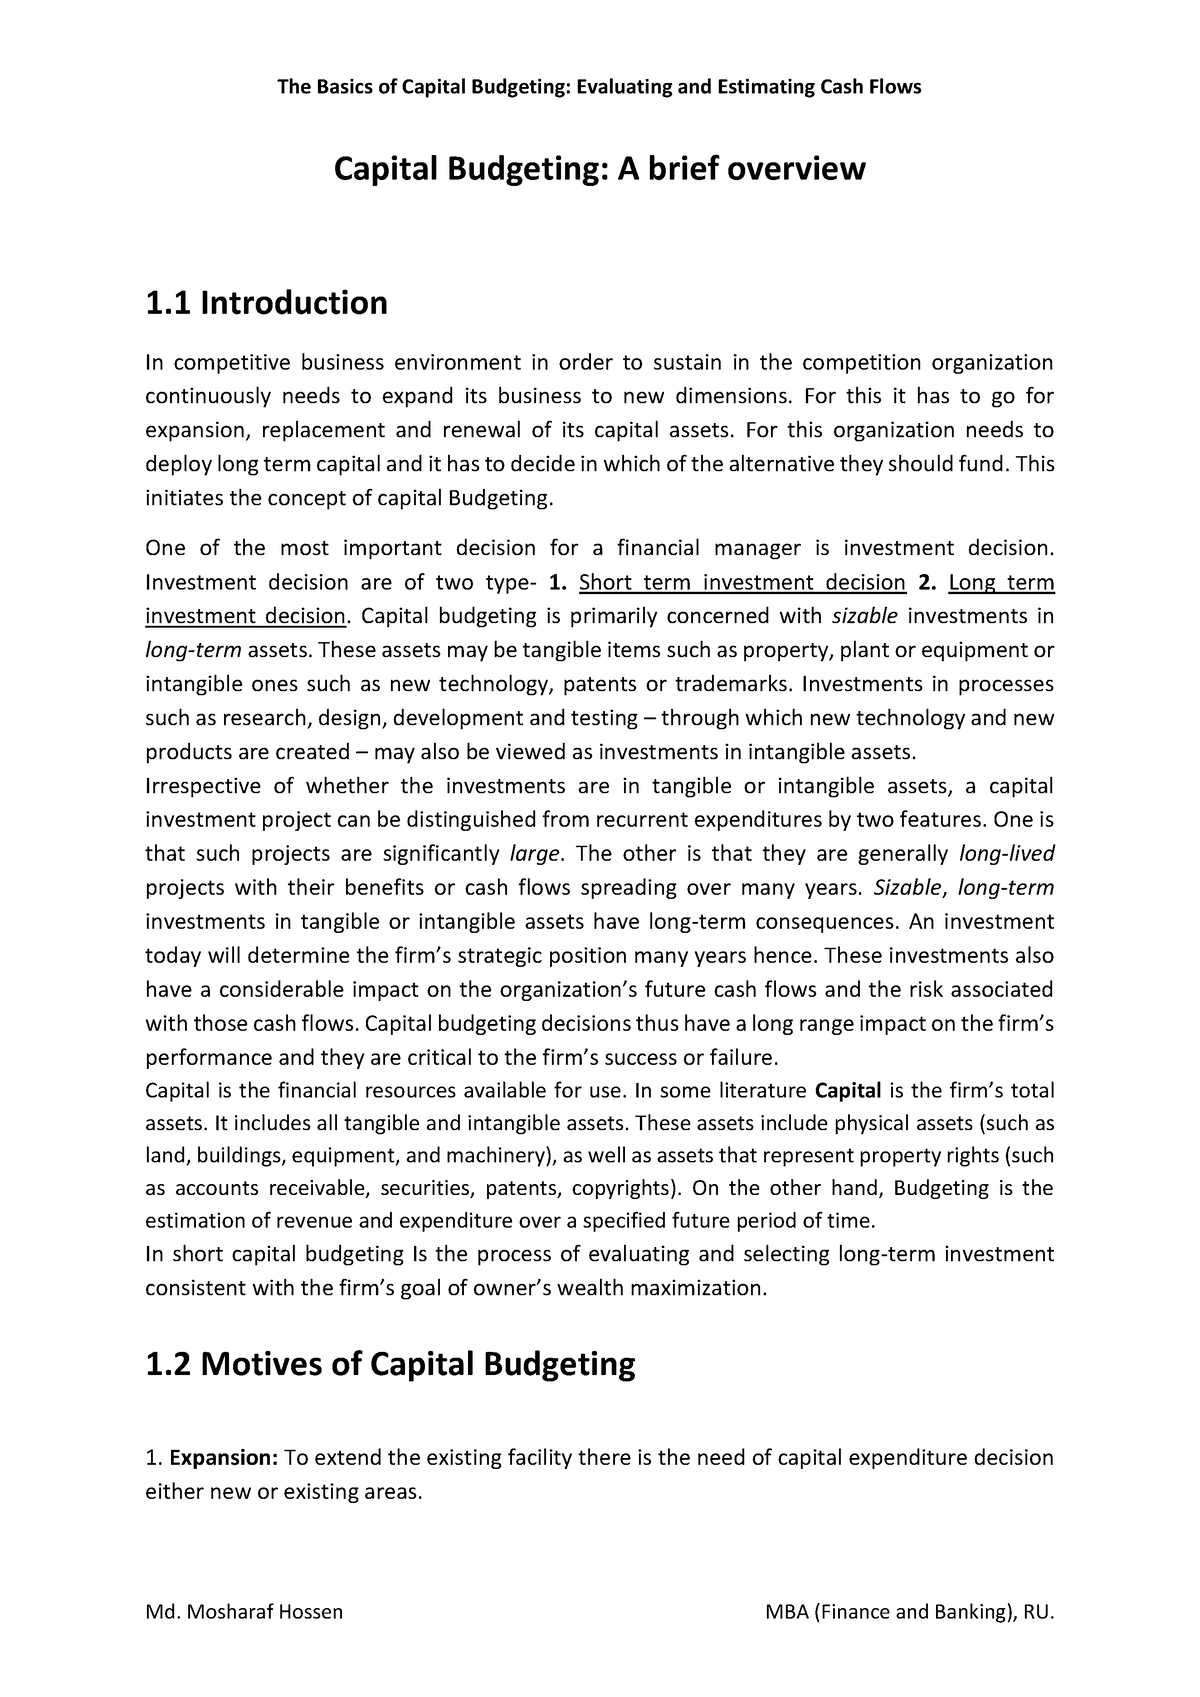 literature review on capital budgeting